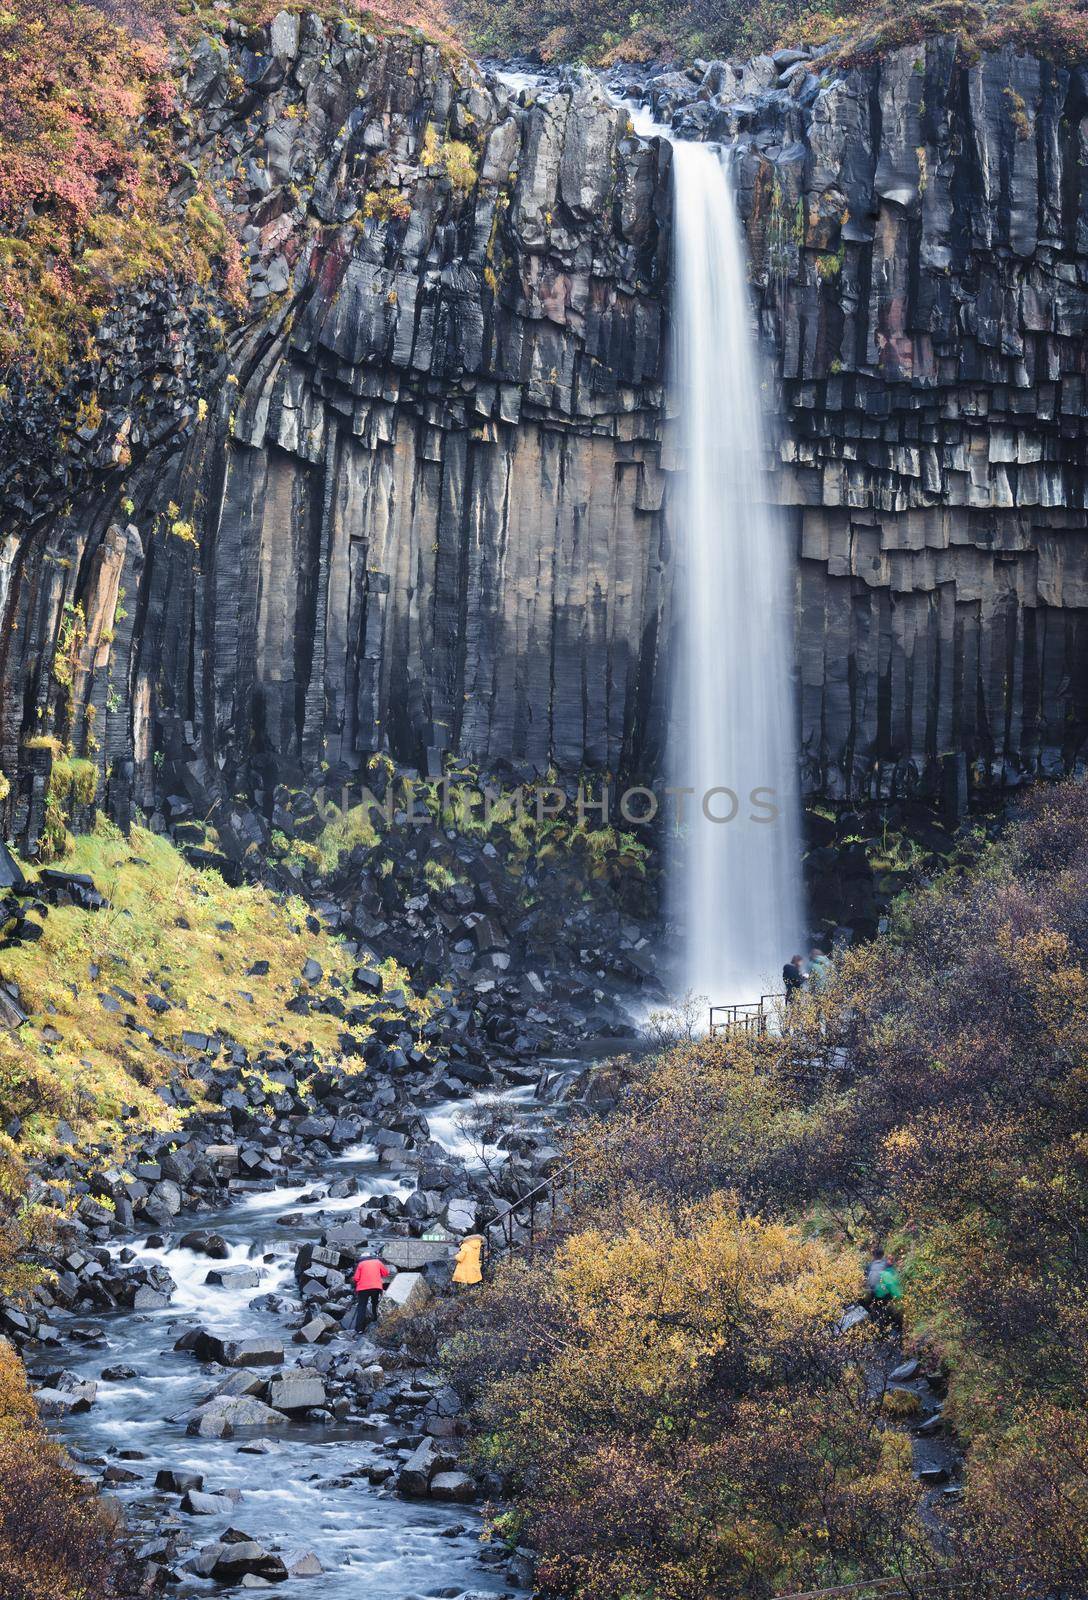 Svartifoss waterfall silk water in Skaftafell national park in Iceland with tourists by FerradalFCG